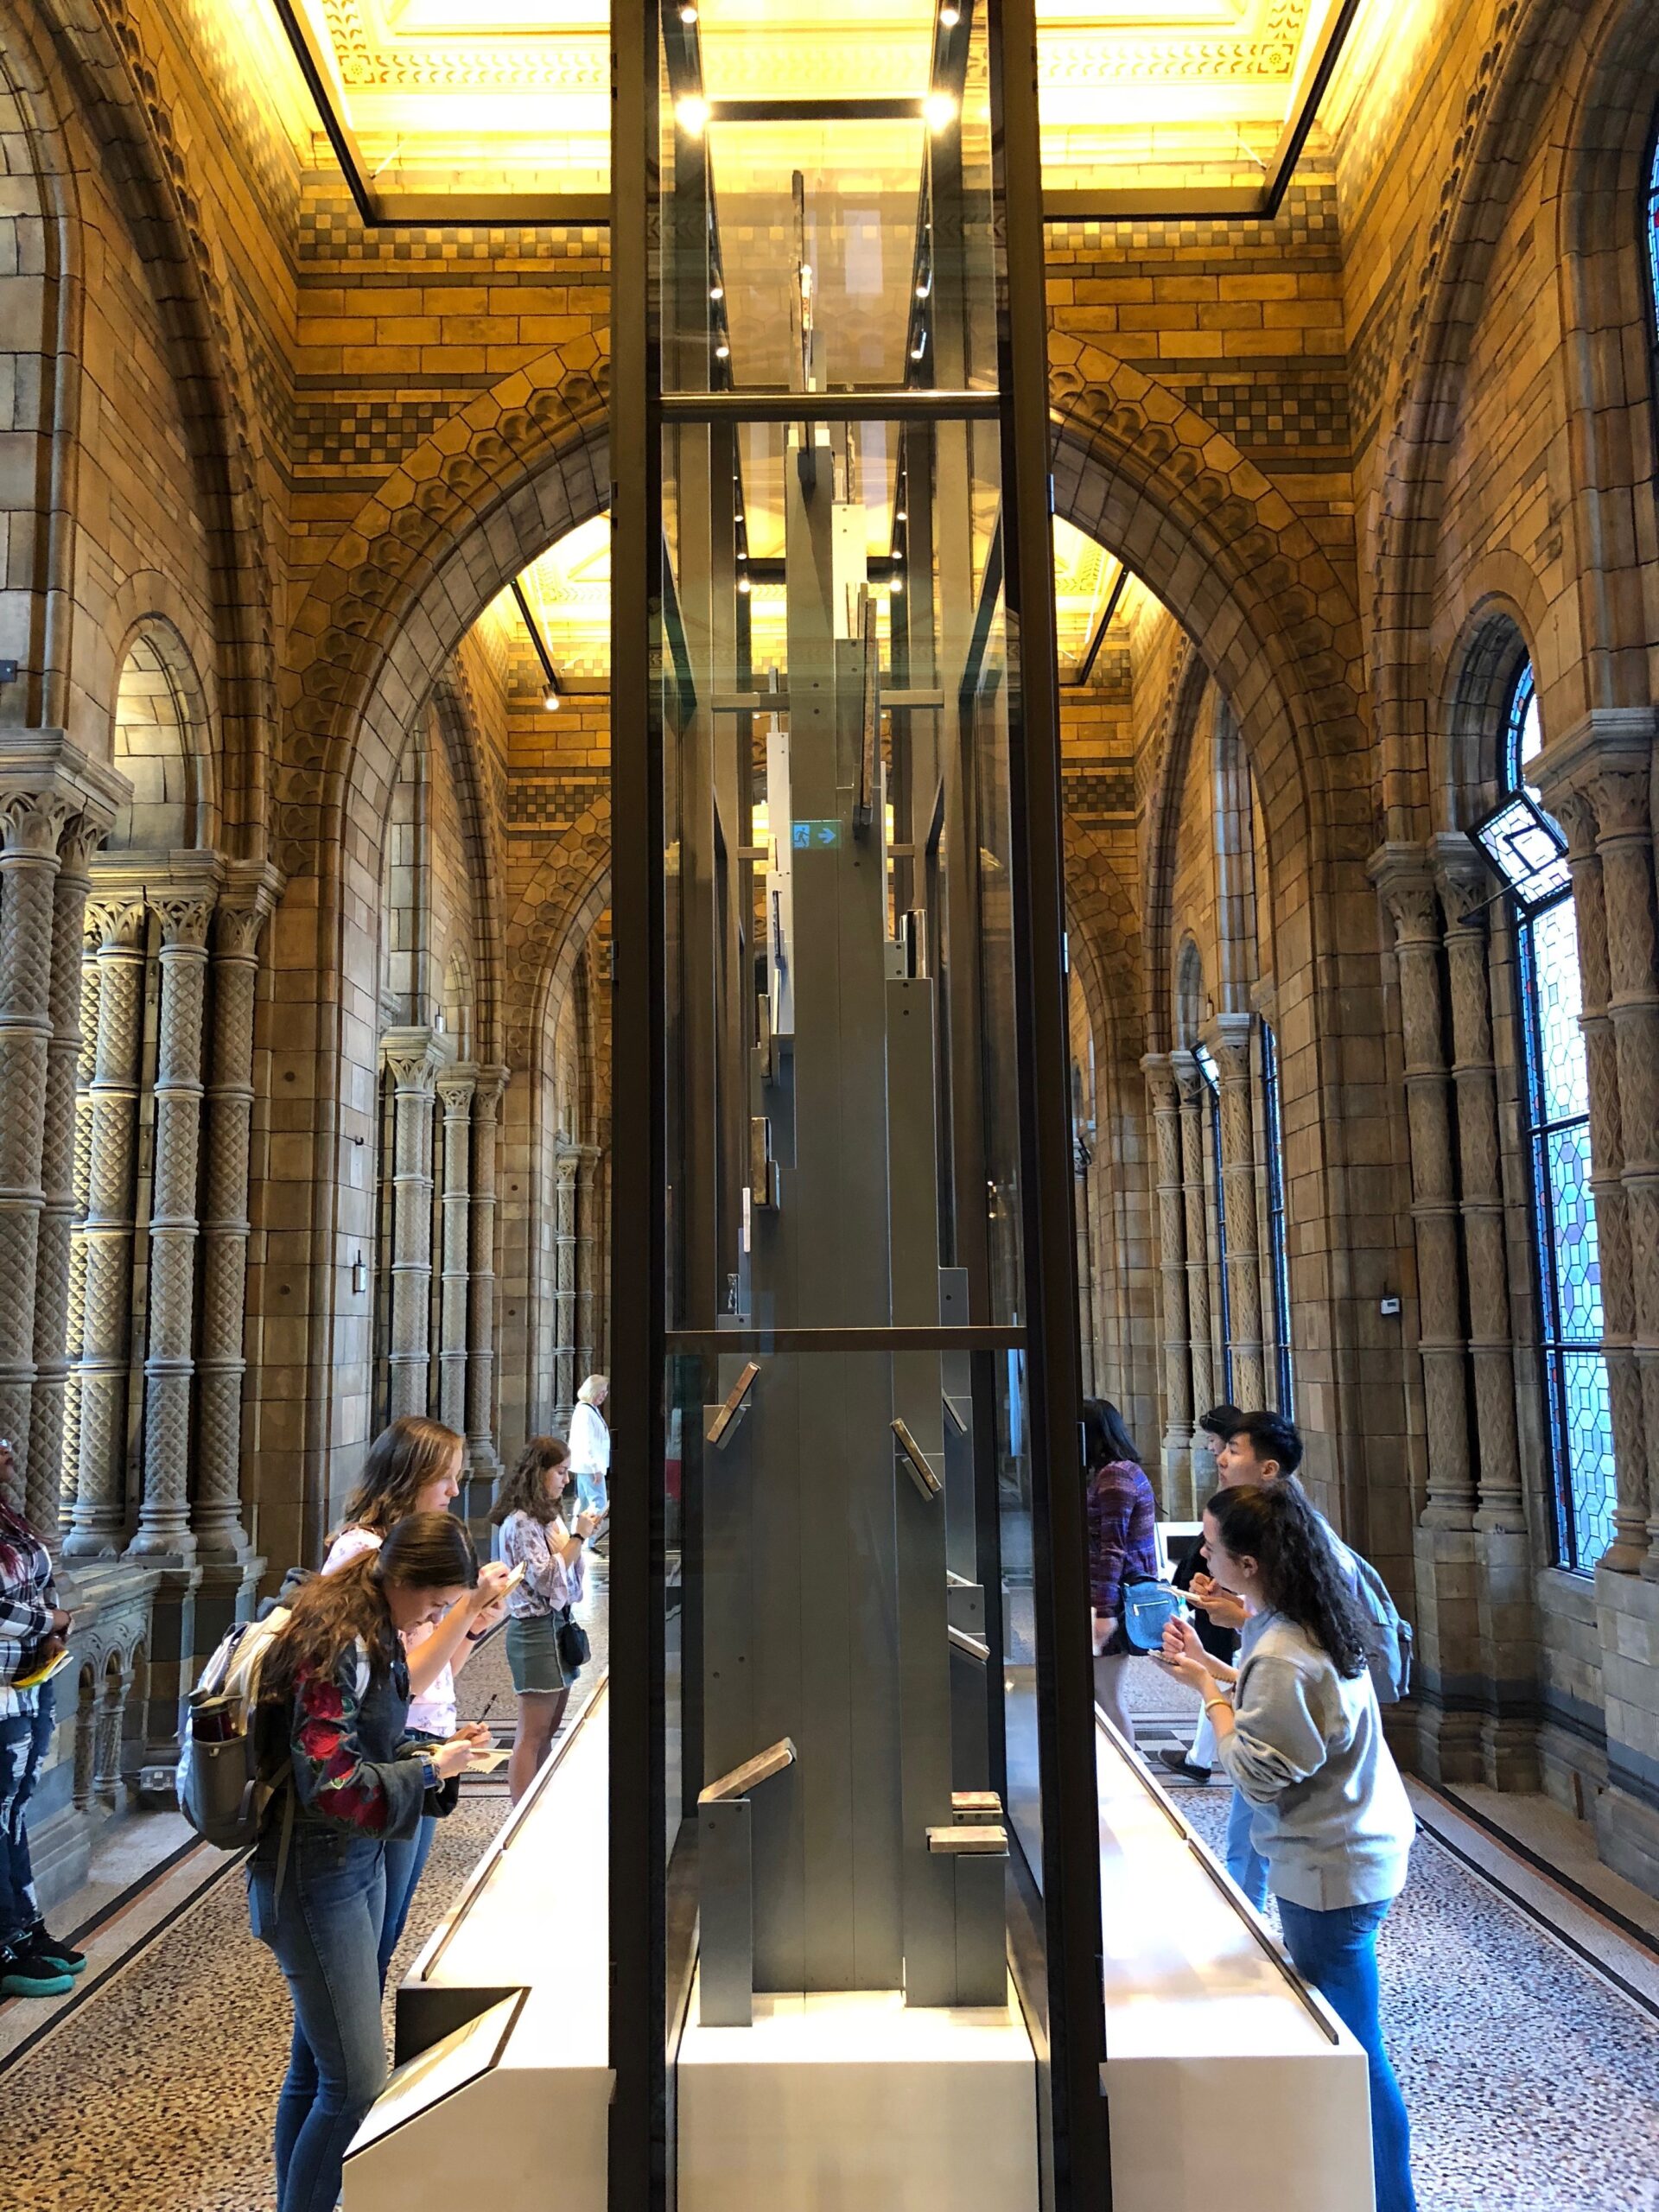 Students examine the exhibits at the Natural History Museum in London, UK.